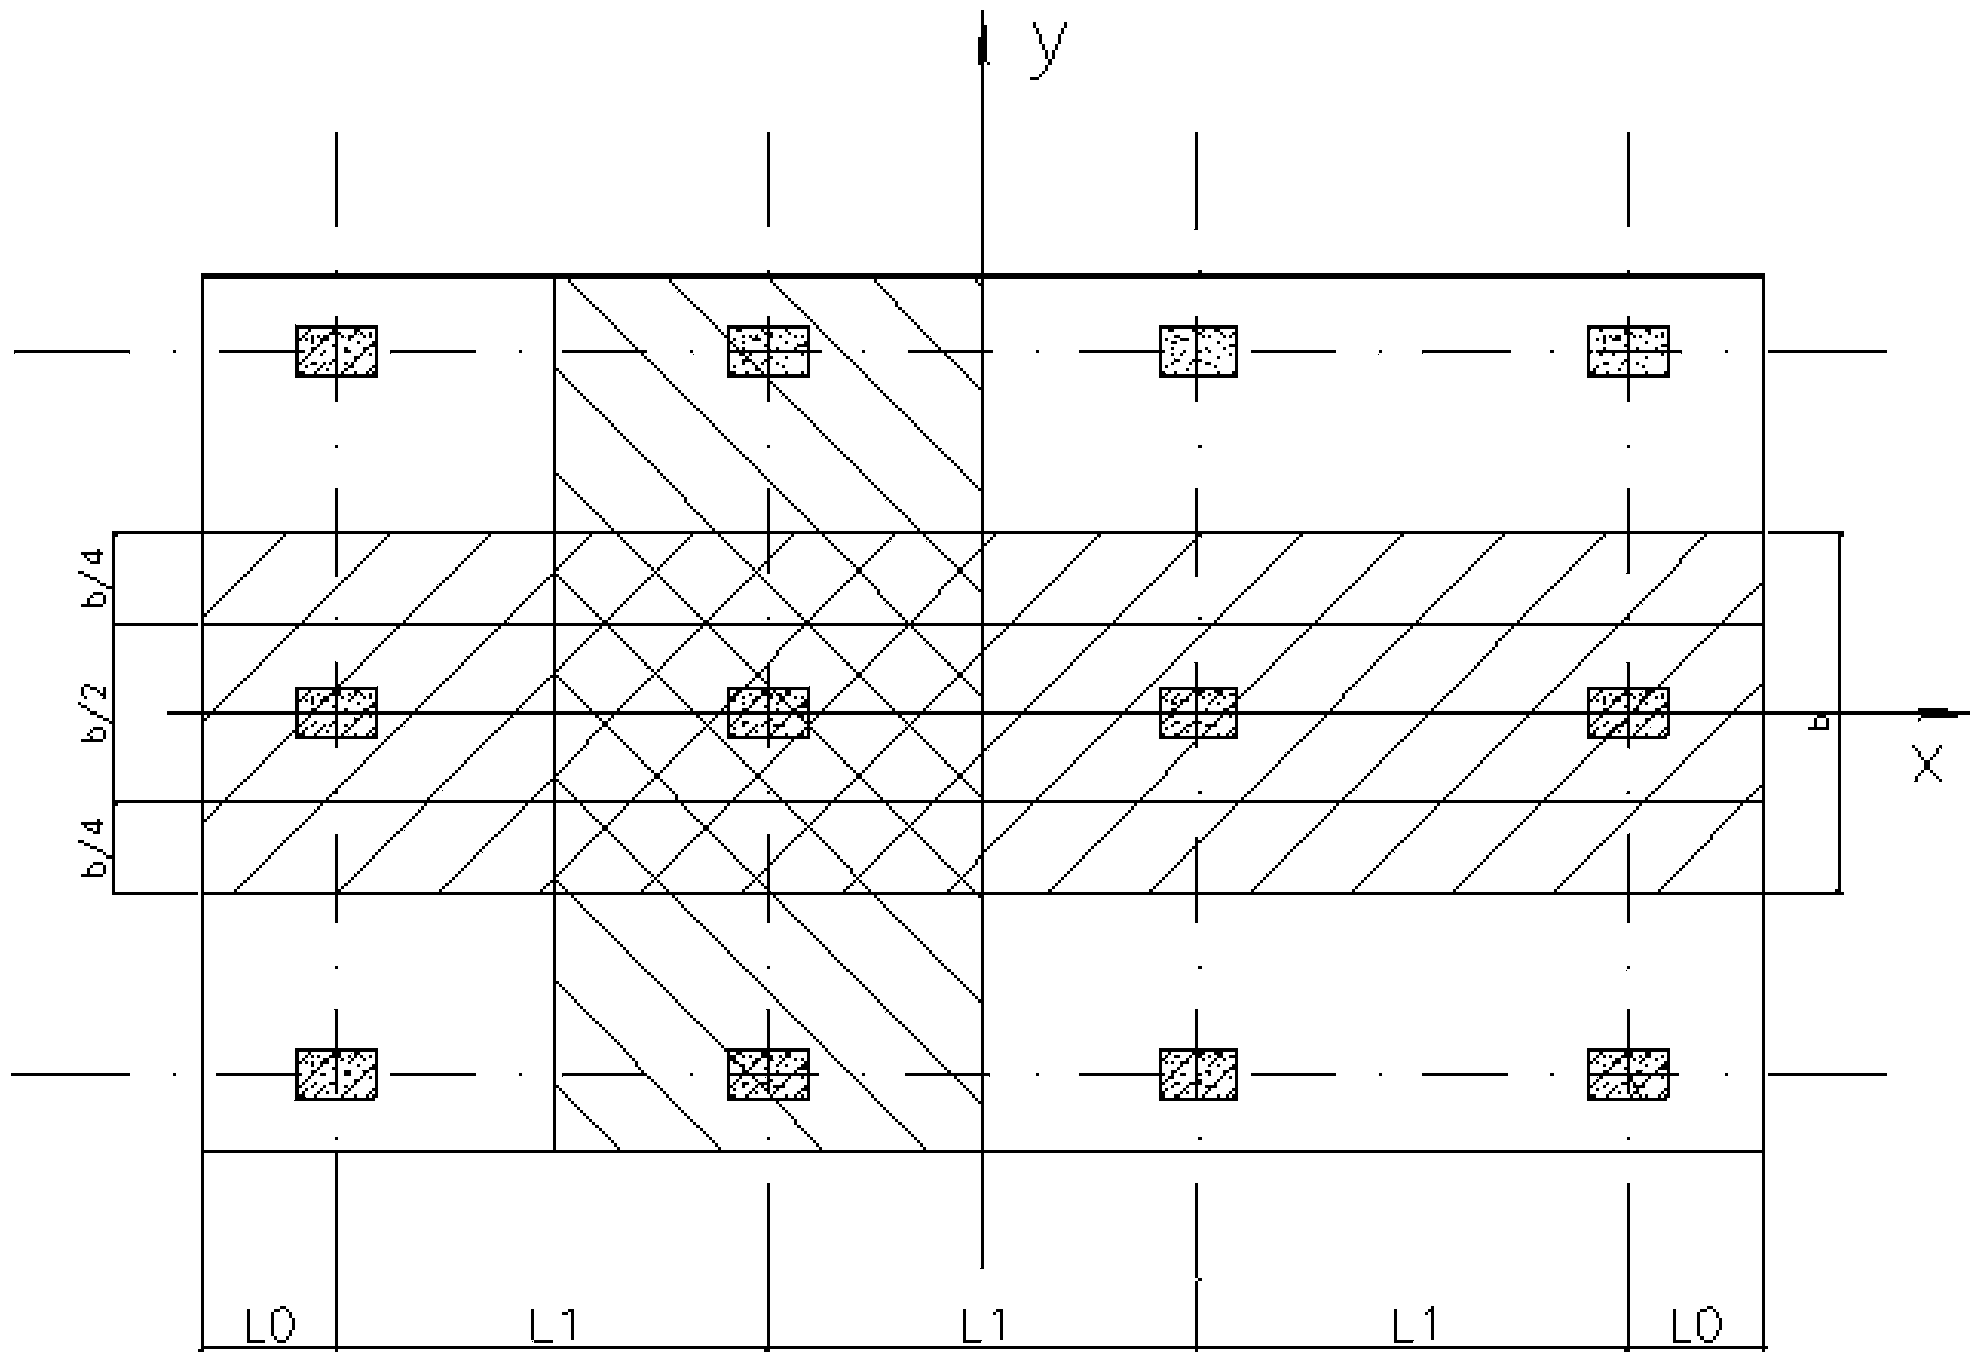 Calculation method for piled raft infrastructure